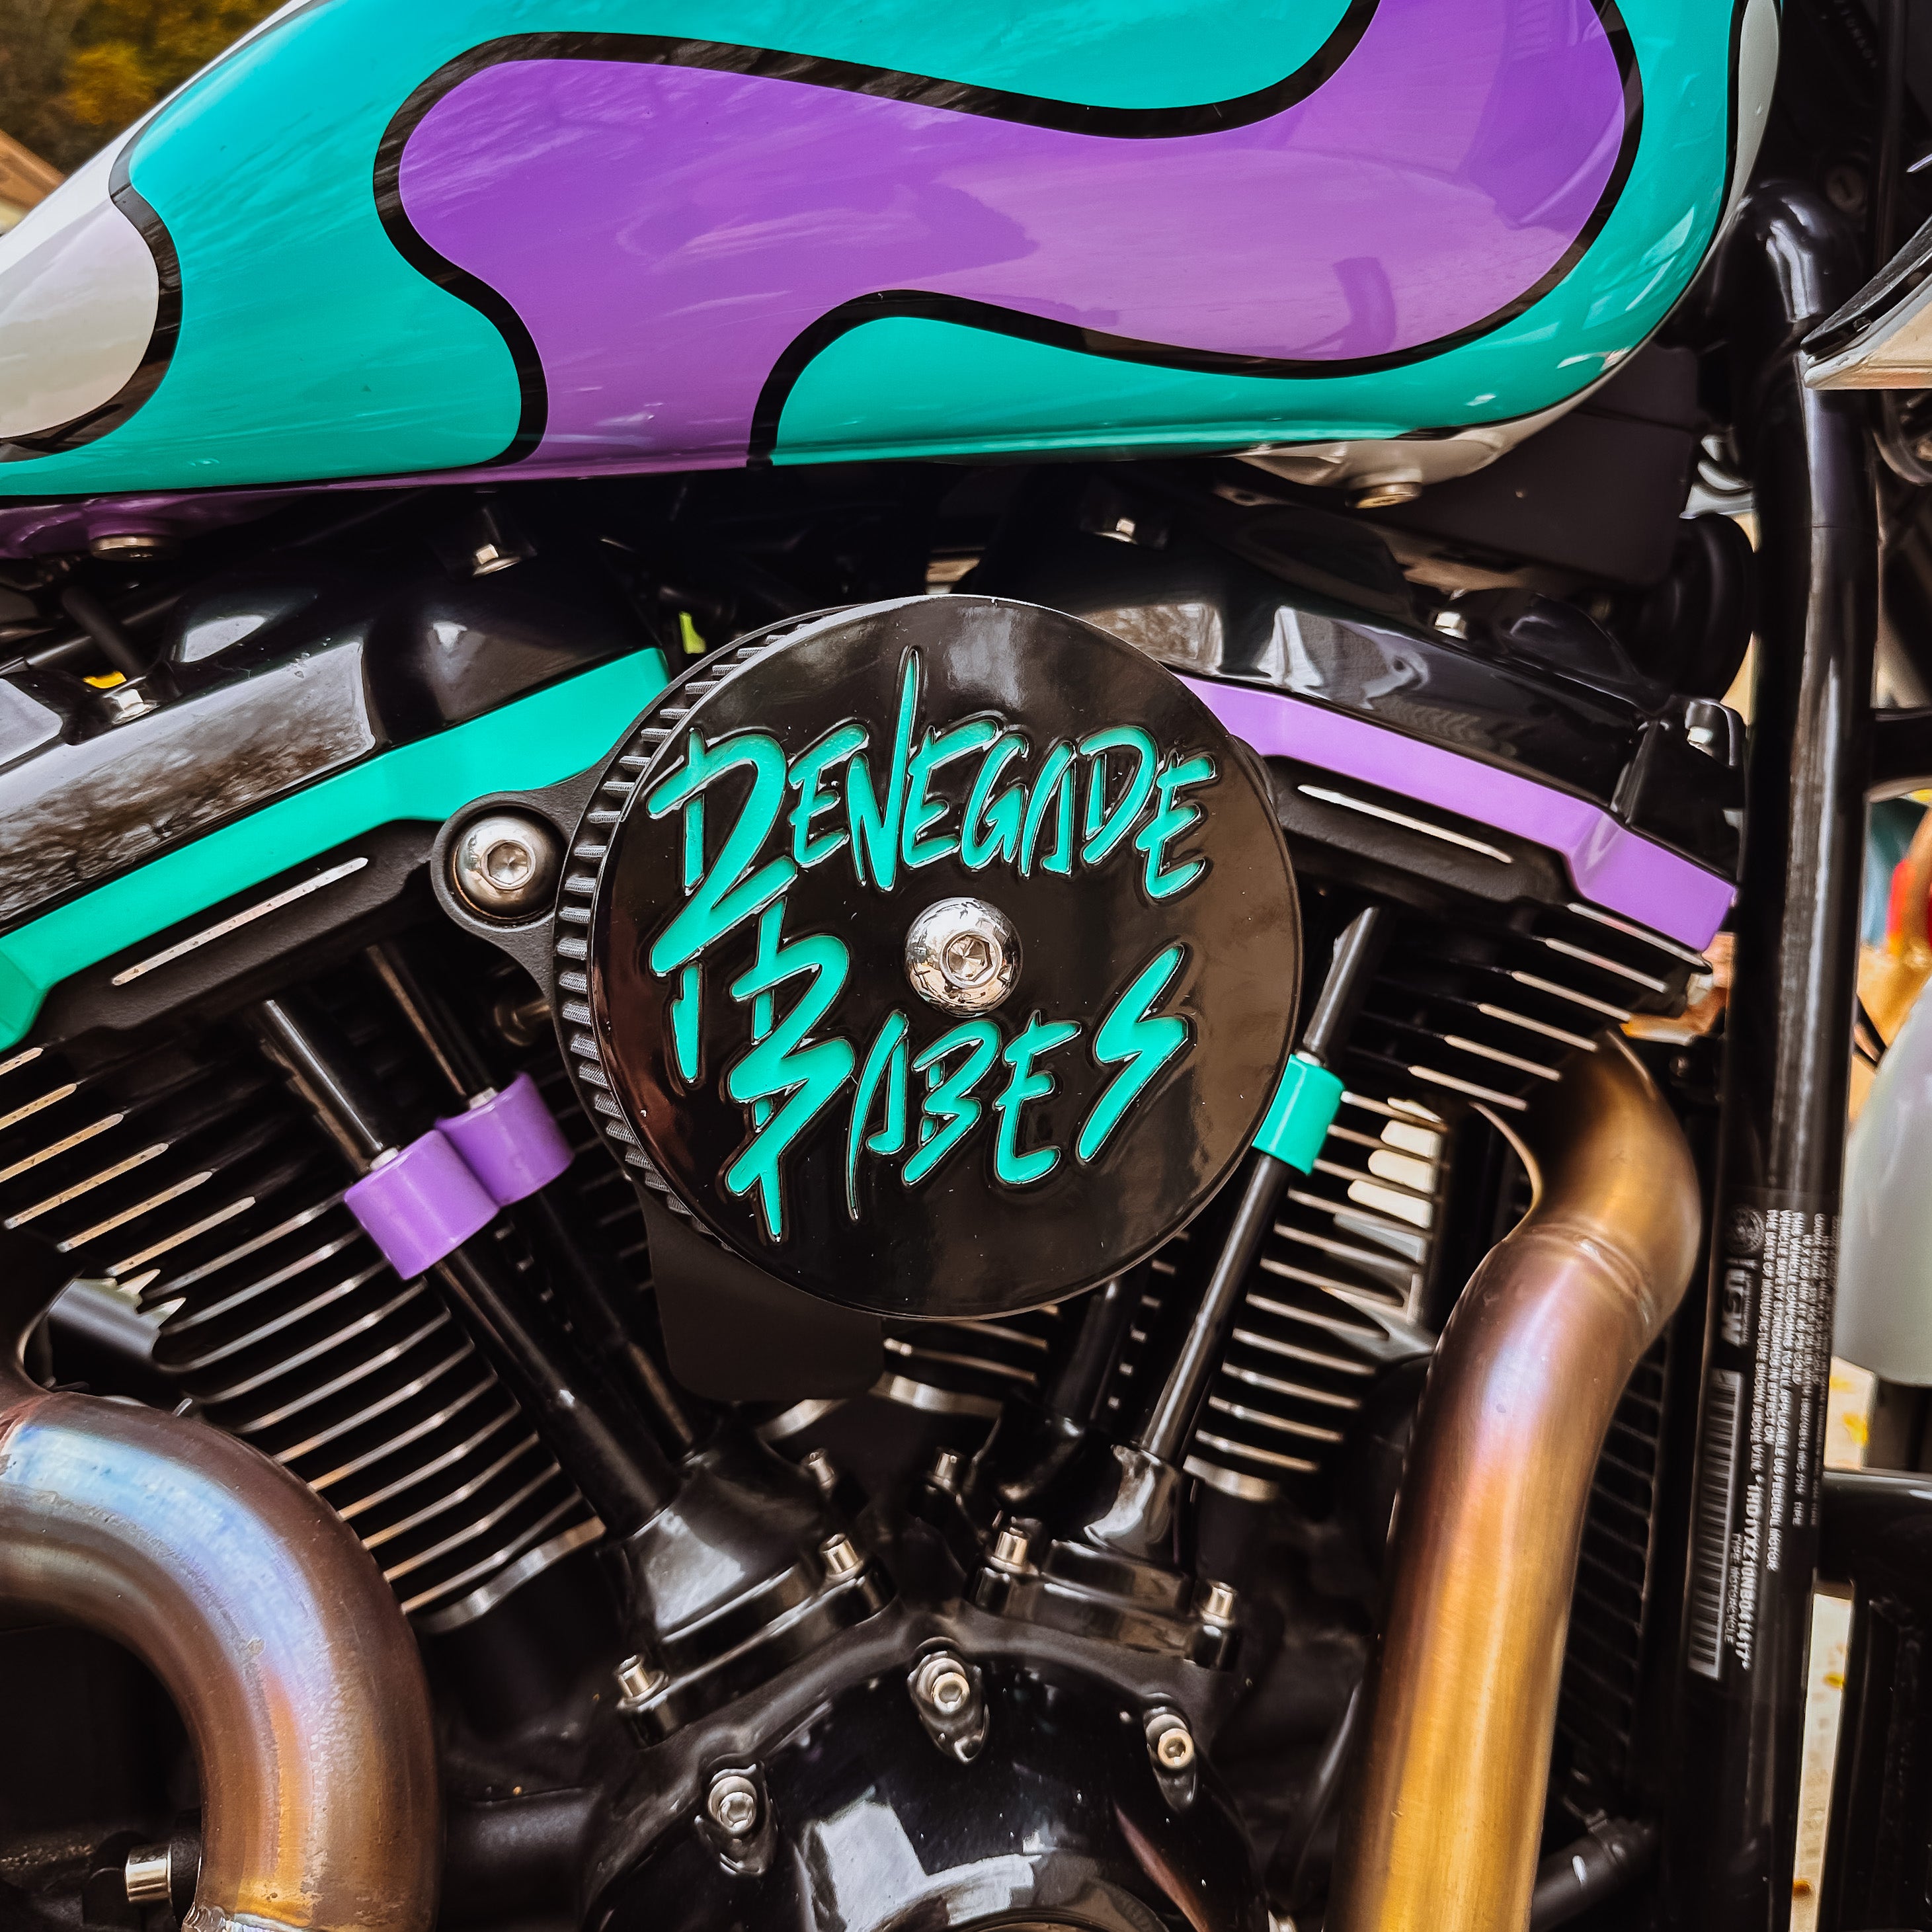 Renegade Babes Signature Air Cleaner Cover